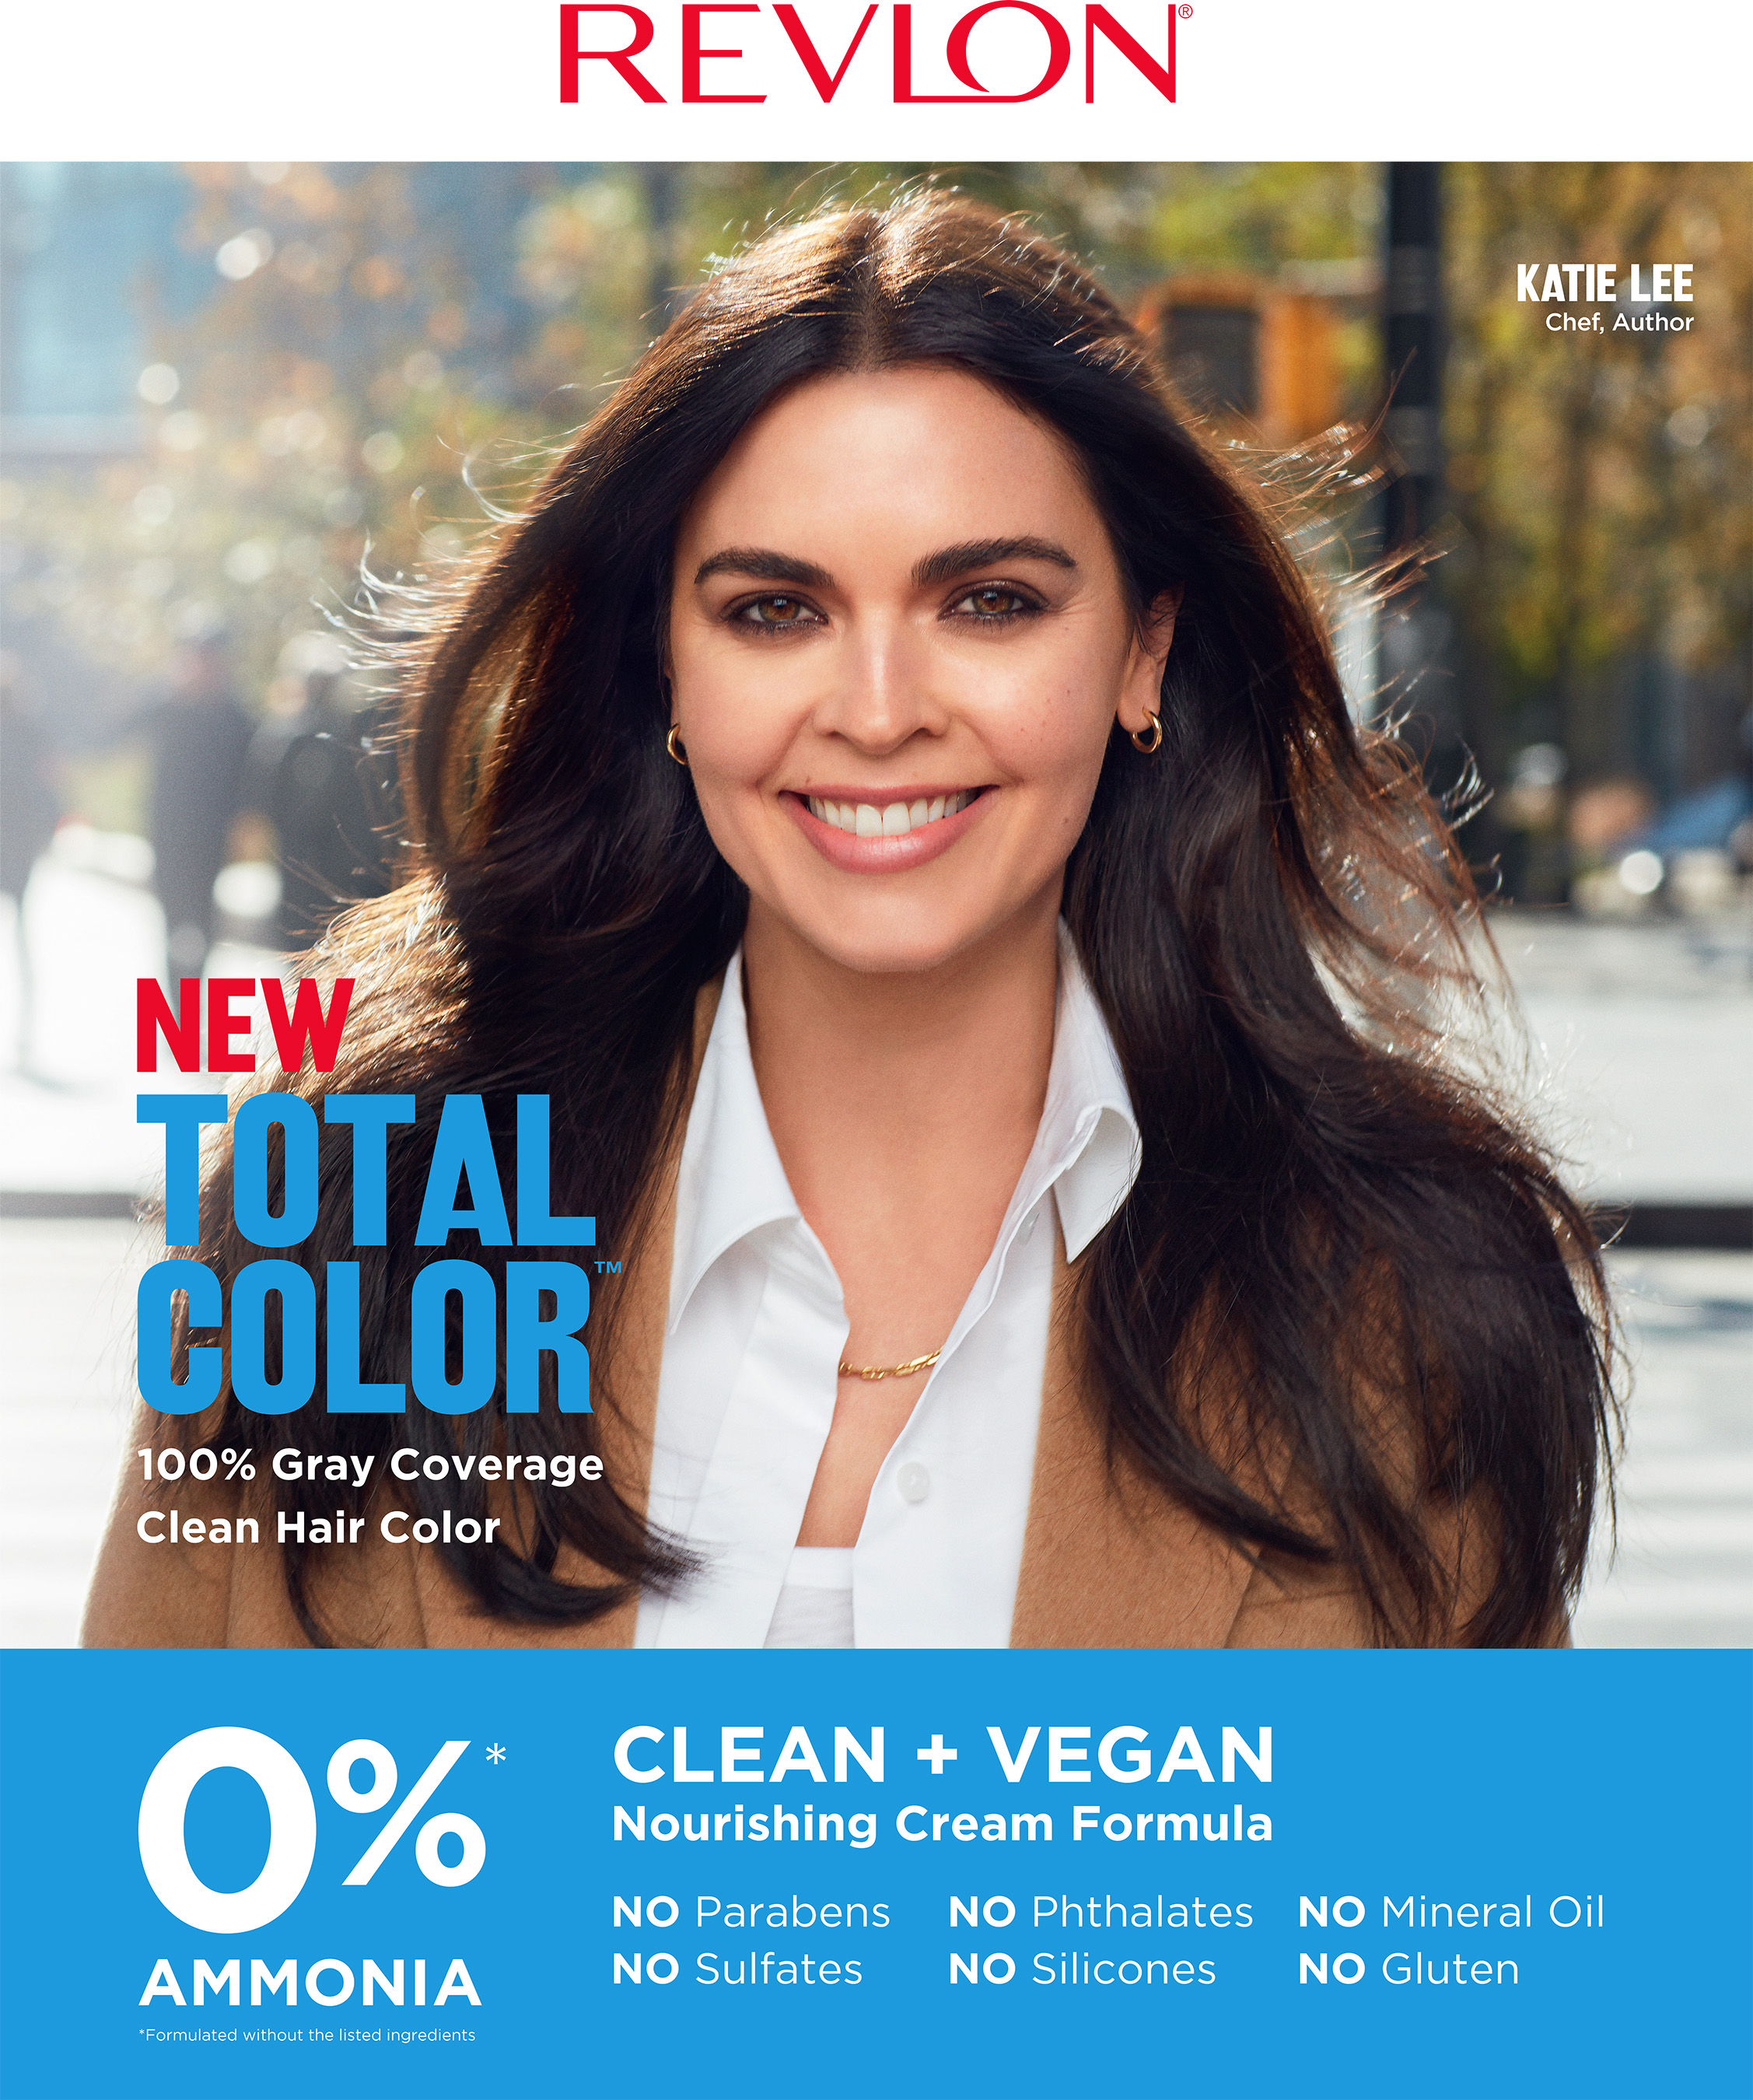 Revlon Launches Total Color, A New Breakthrough in Clean and Vegan  Permanent Hair Color with chef and author Katie Lee